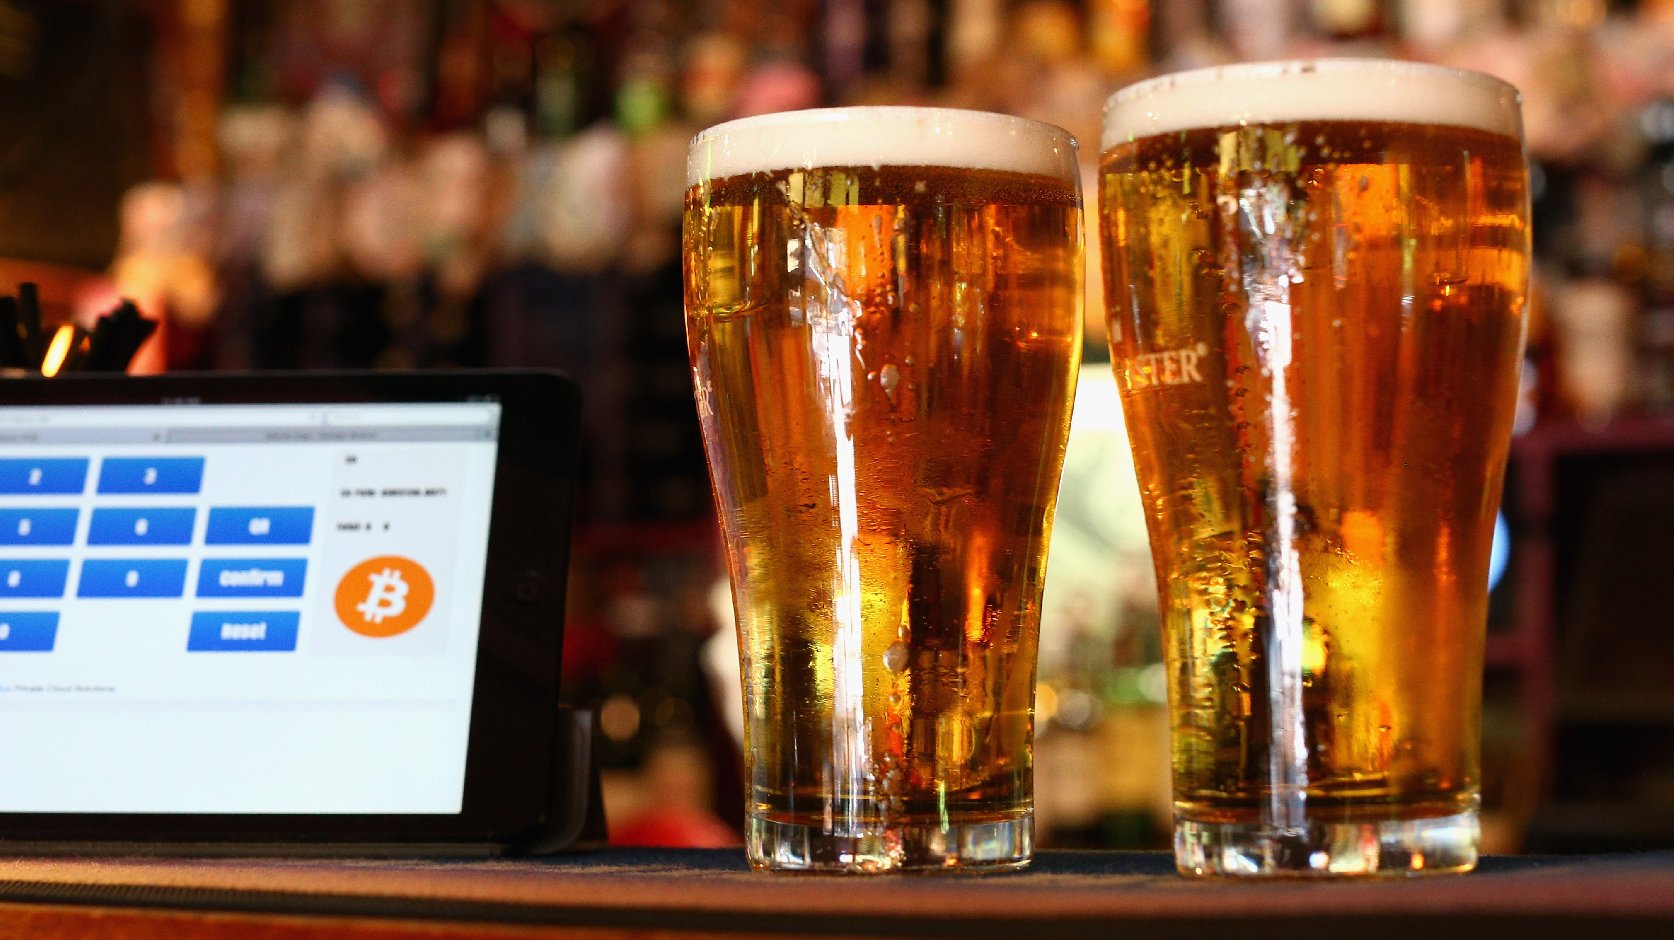 Bitcoin isn't just for shady business — it can also buy you some delicious goodness. The Old Fitzroy pub in Sydney, Australia, is one of many food and drink businesses beginning to accept Bitcoin as a valid method of payment. Photo: Cameron Spencer/Getty Images